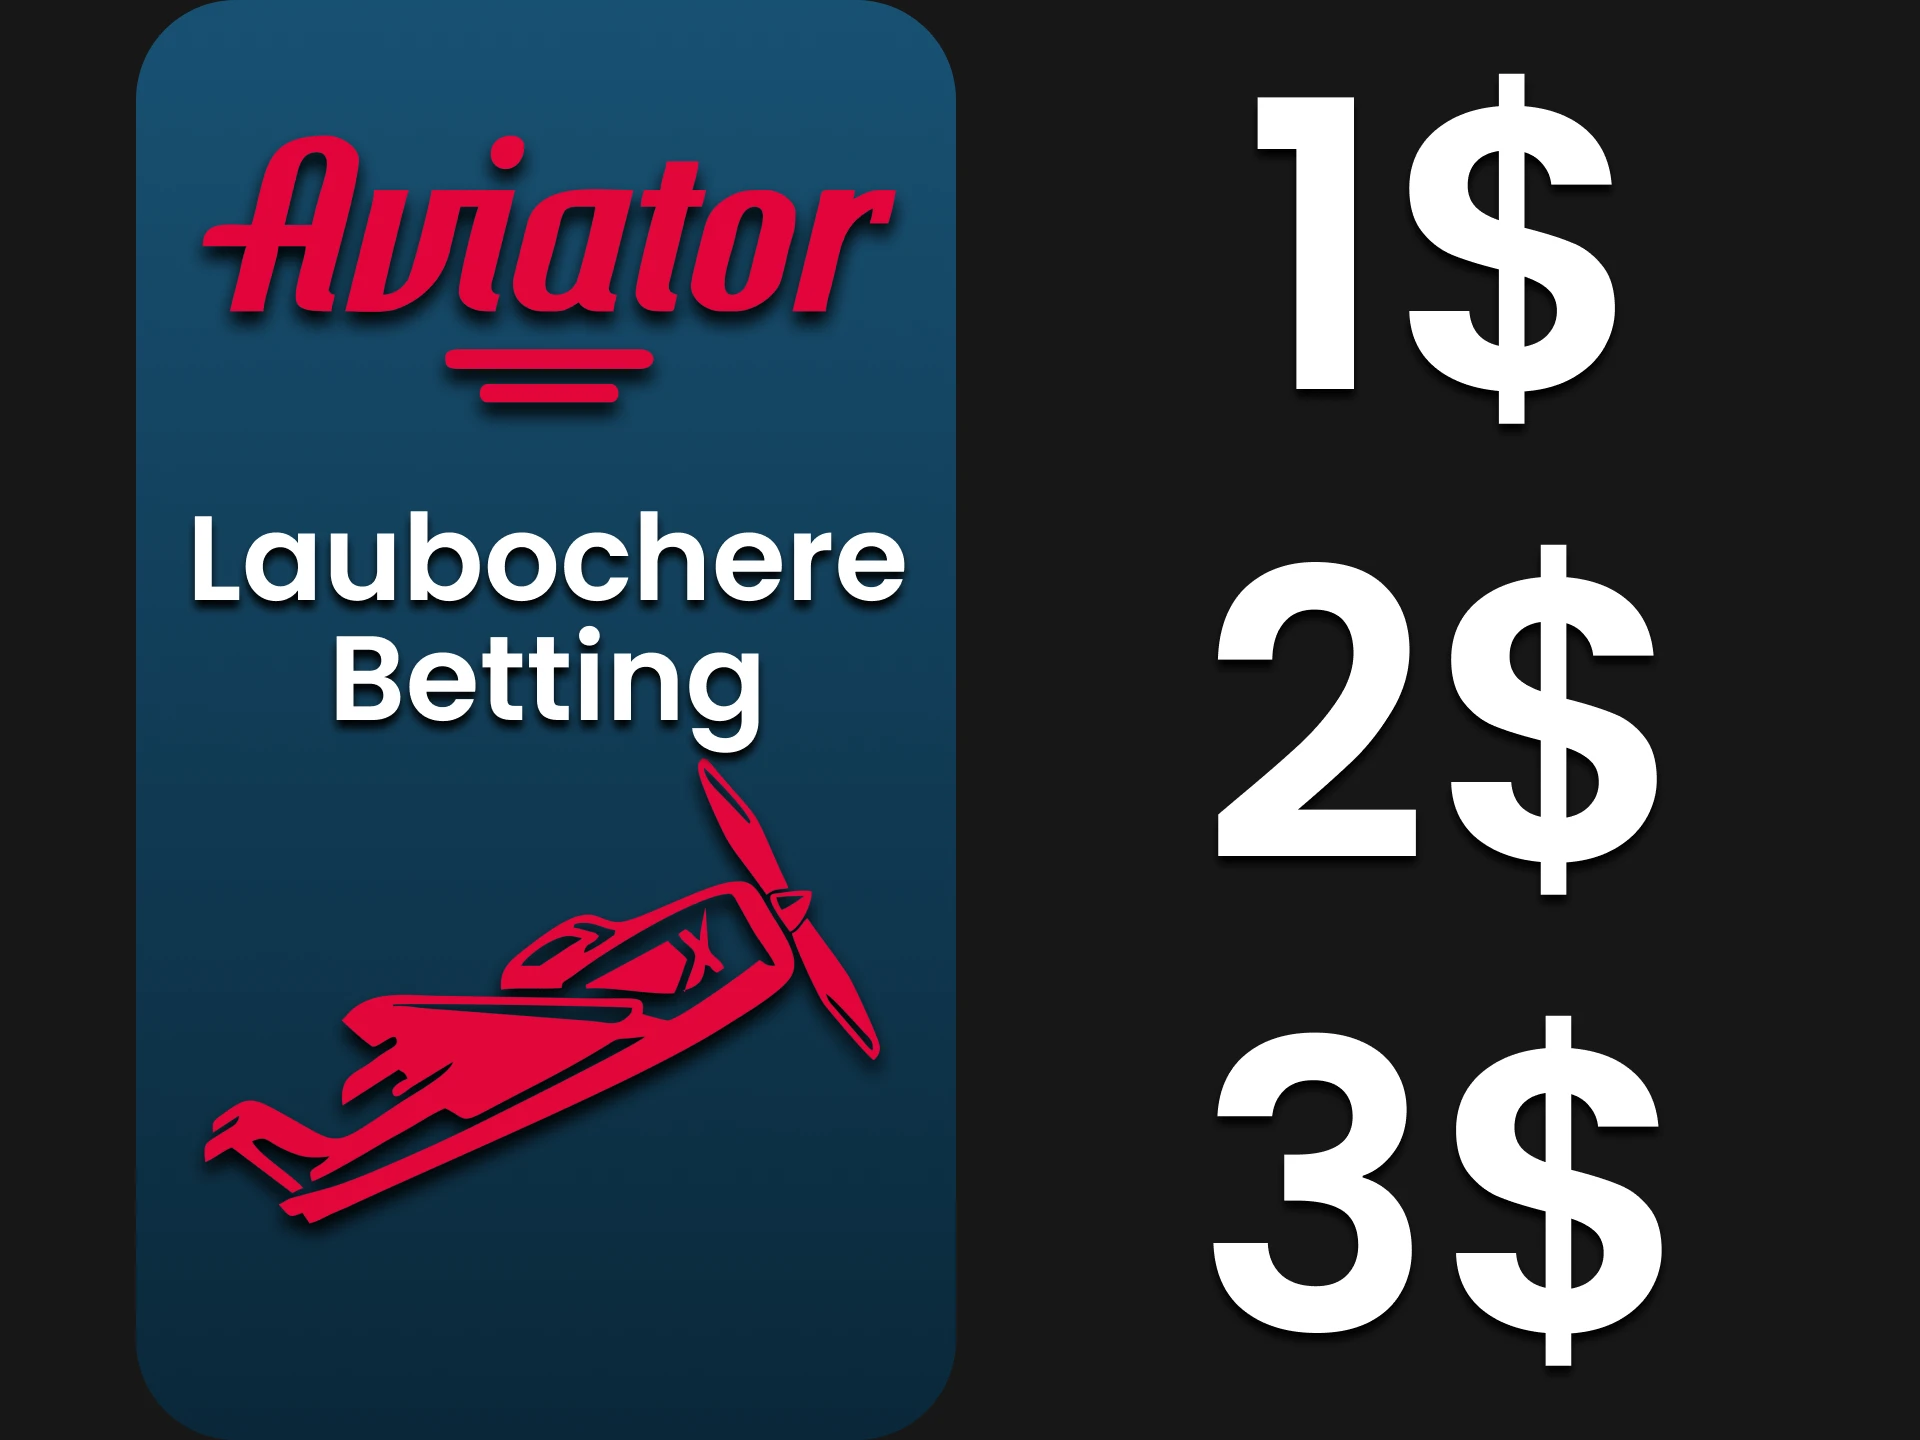 We will tell you about the Laubochere Betting strategy for the Aviator game.